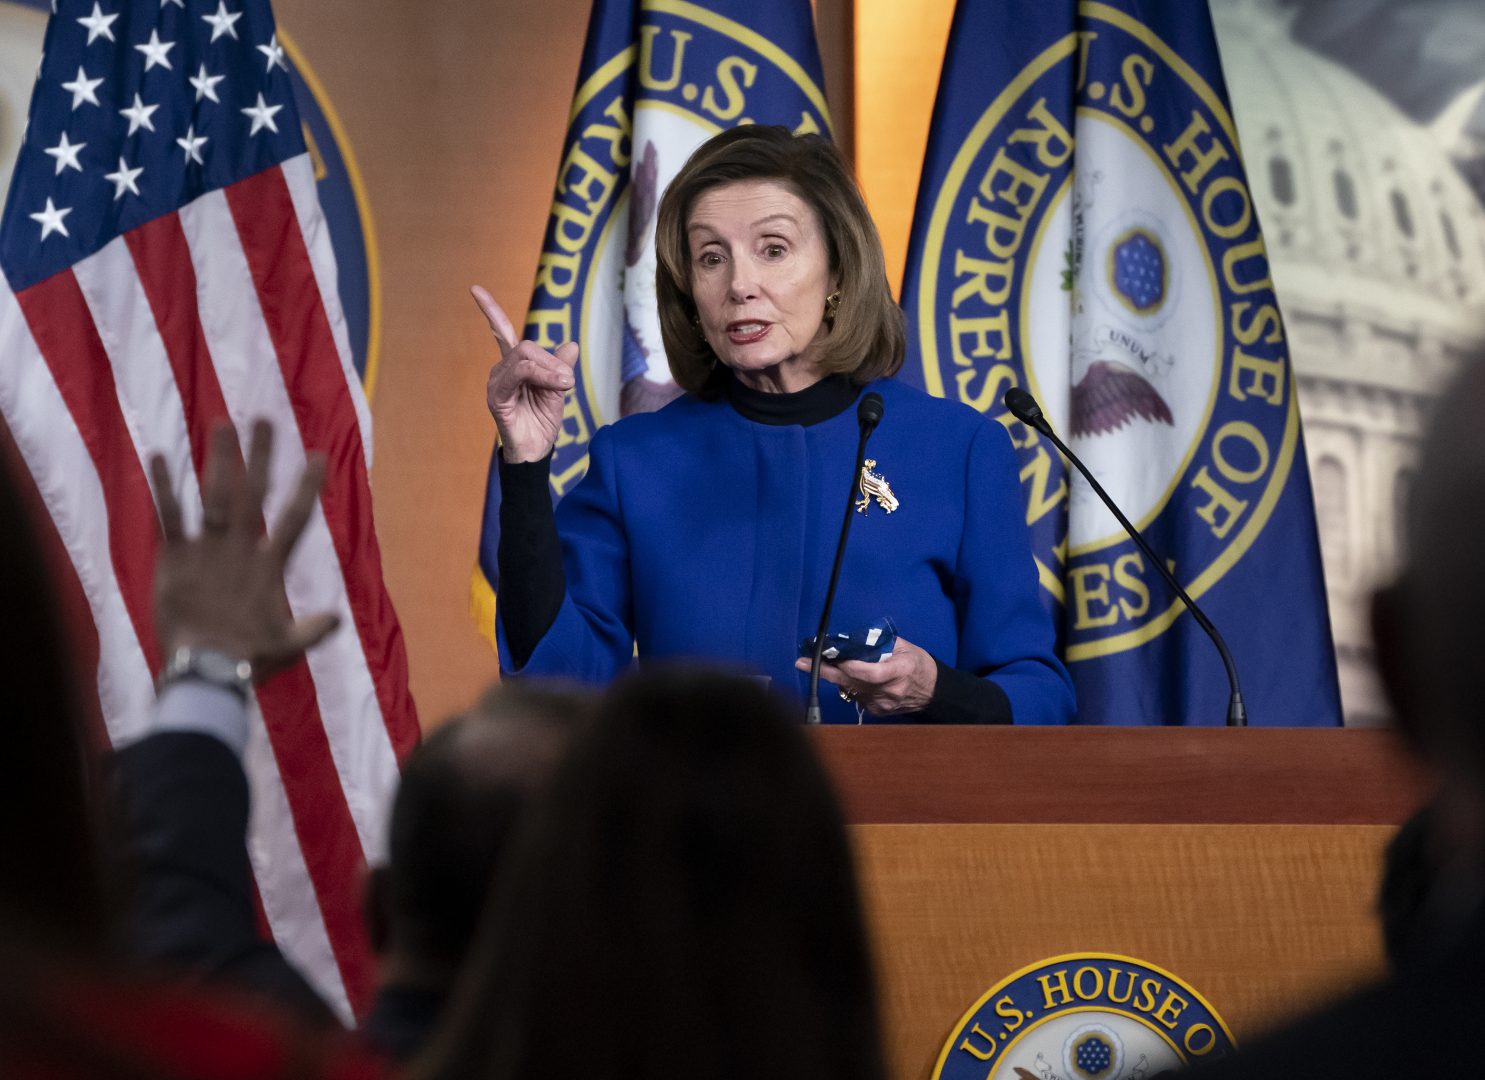 Speaker of the House Nancy Pelosi, D-Calif., updates reporters on the must-pass priority of funding the government, during a news conference at the Capitol in Washington, Thursday, Dec. 2, 2021.